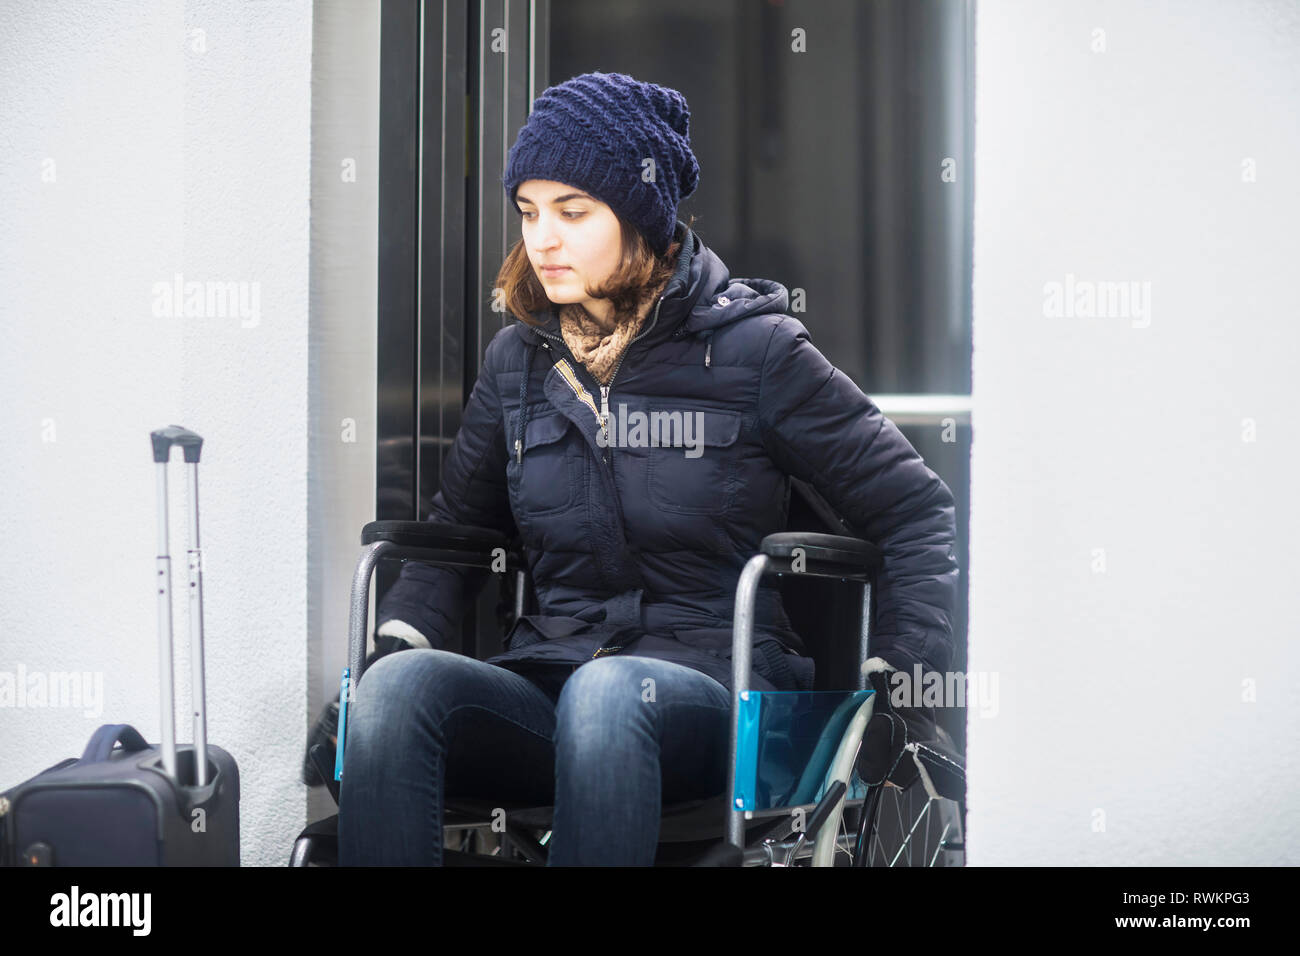 Woman in wheelchair with luggage Stock Photo